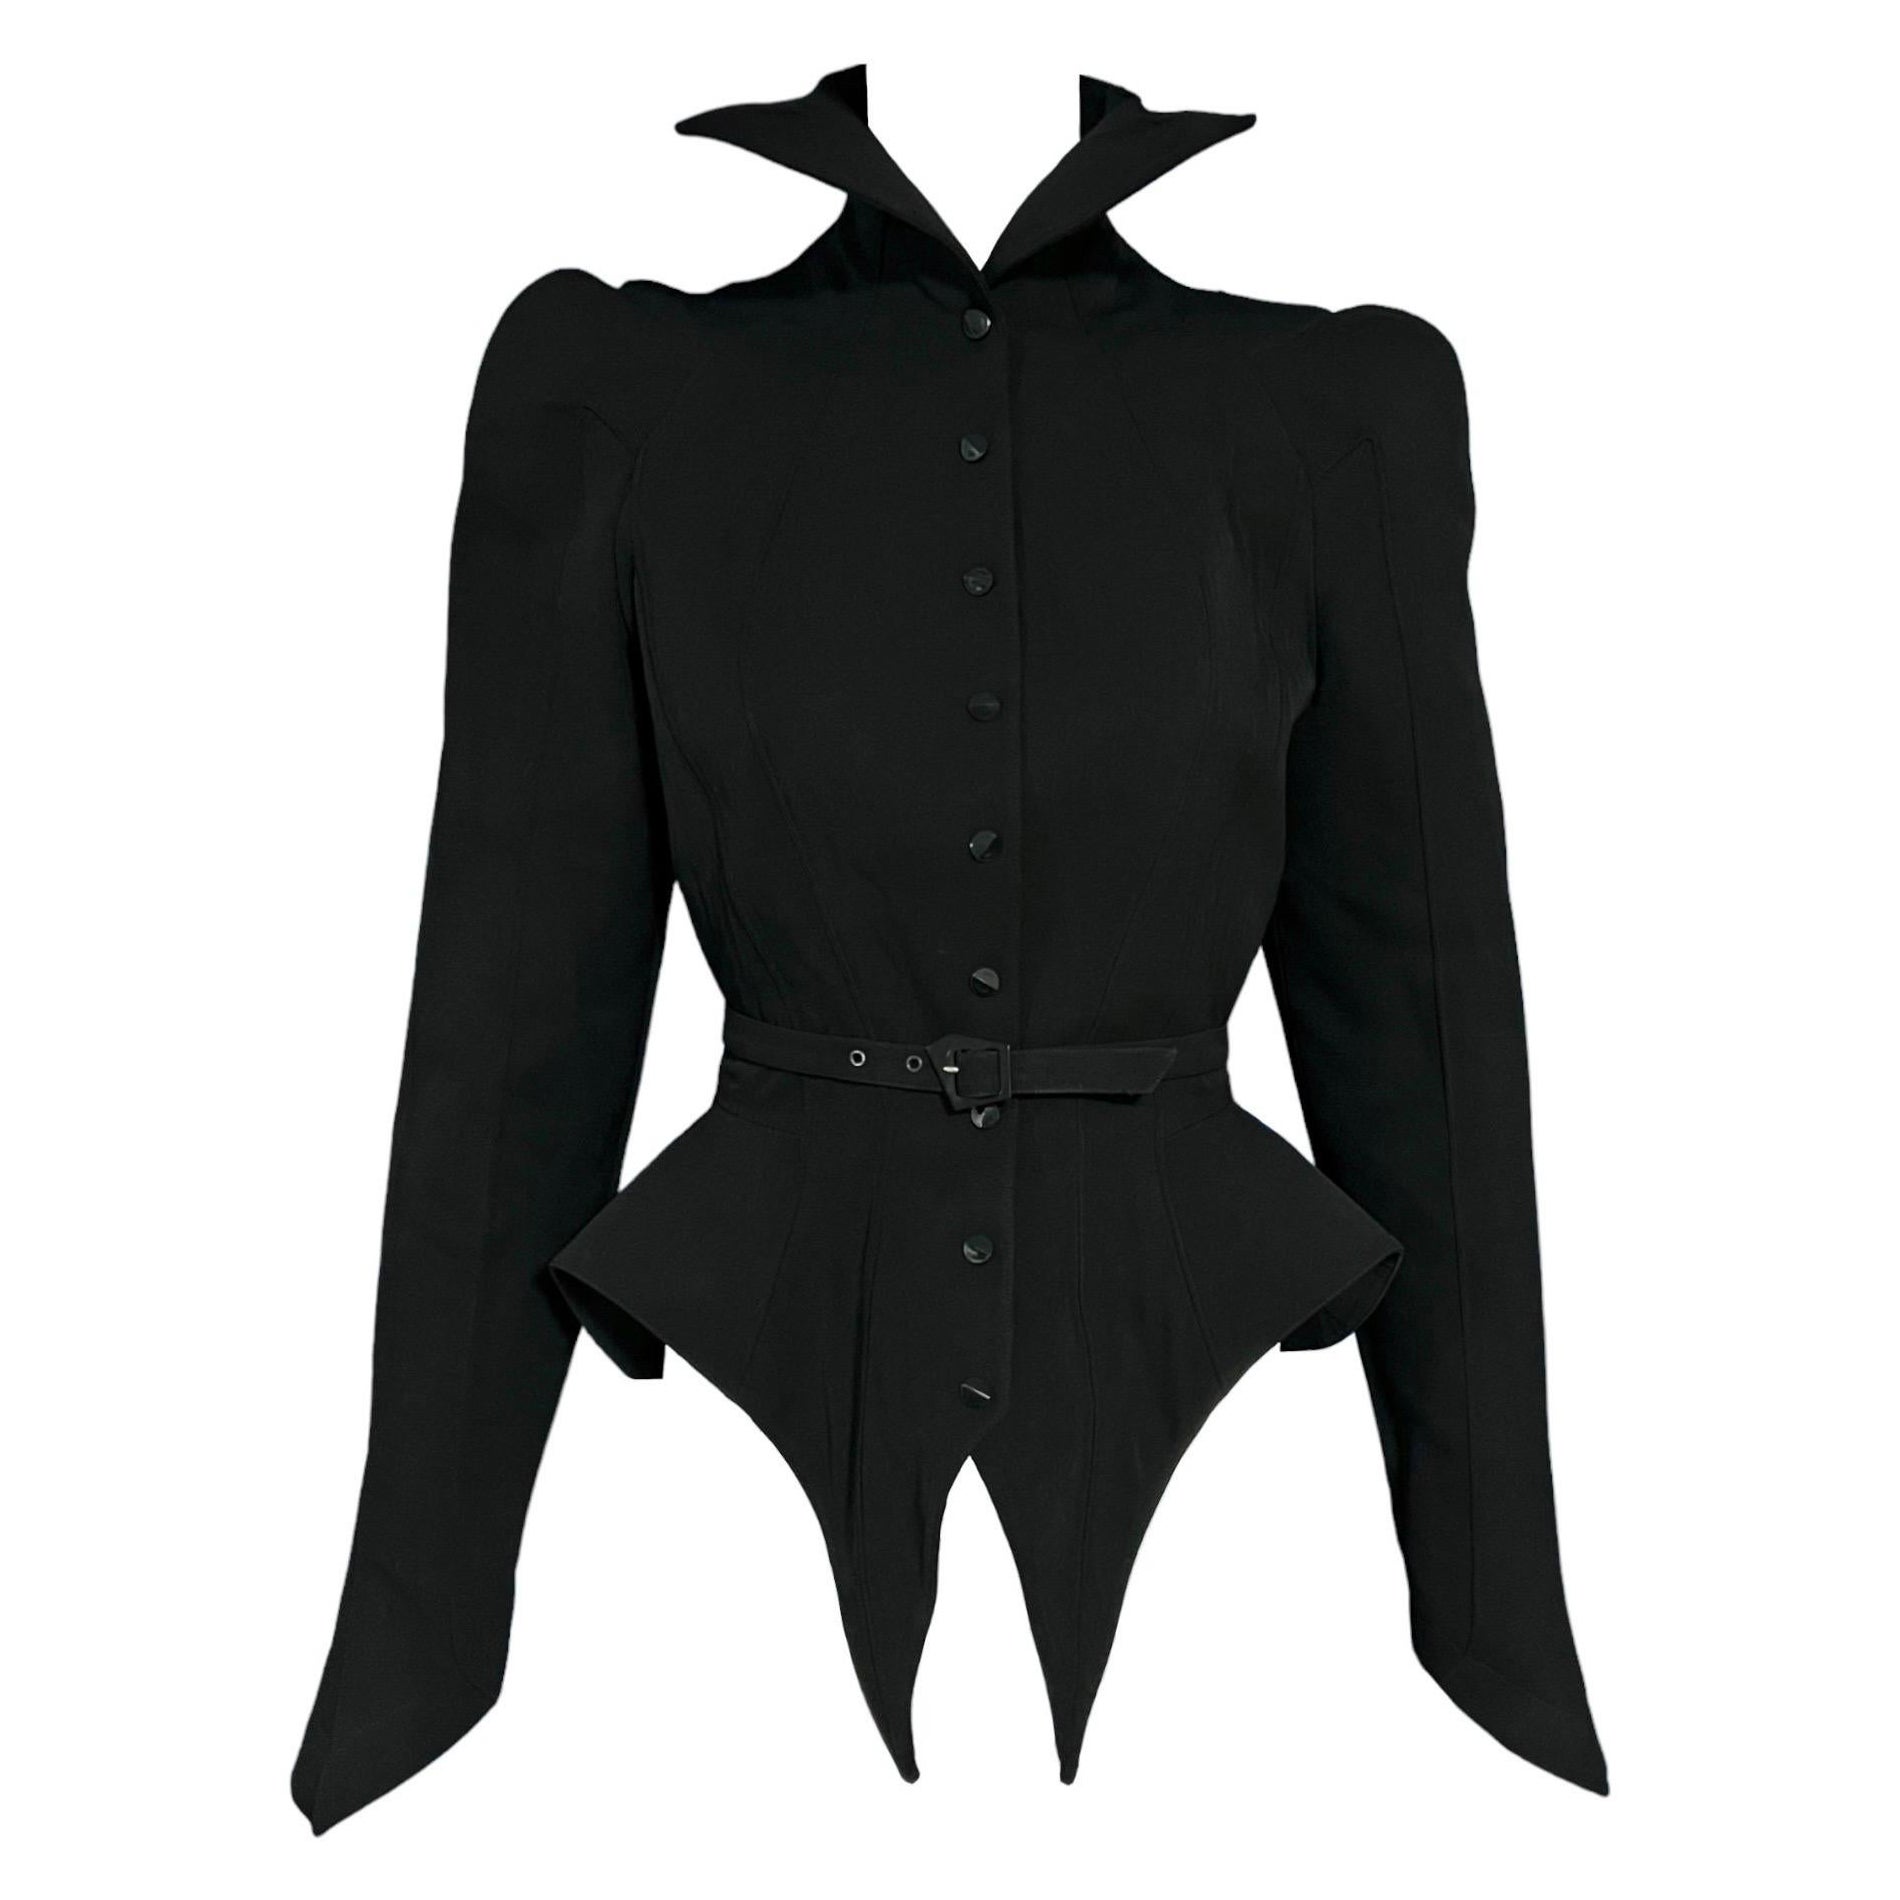 F/W 1988 Thierry Mugler Black Les Infernales Structural Runway Jacket For Sale